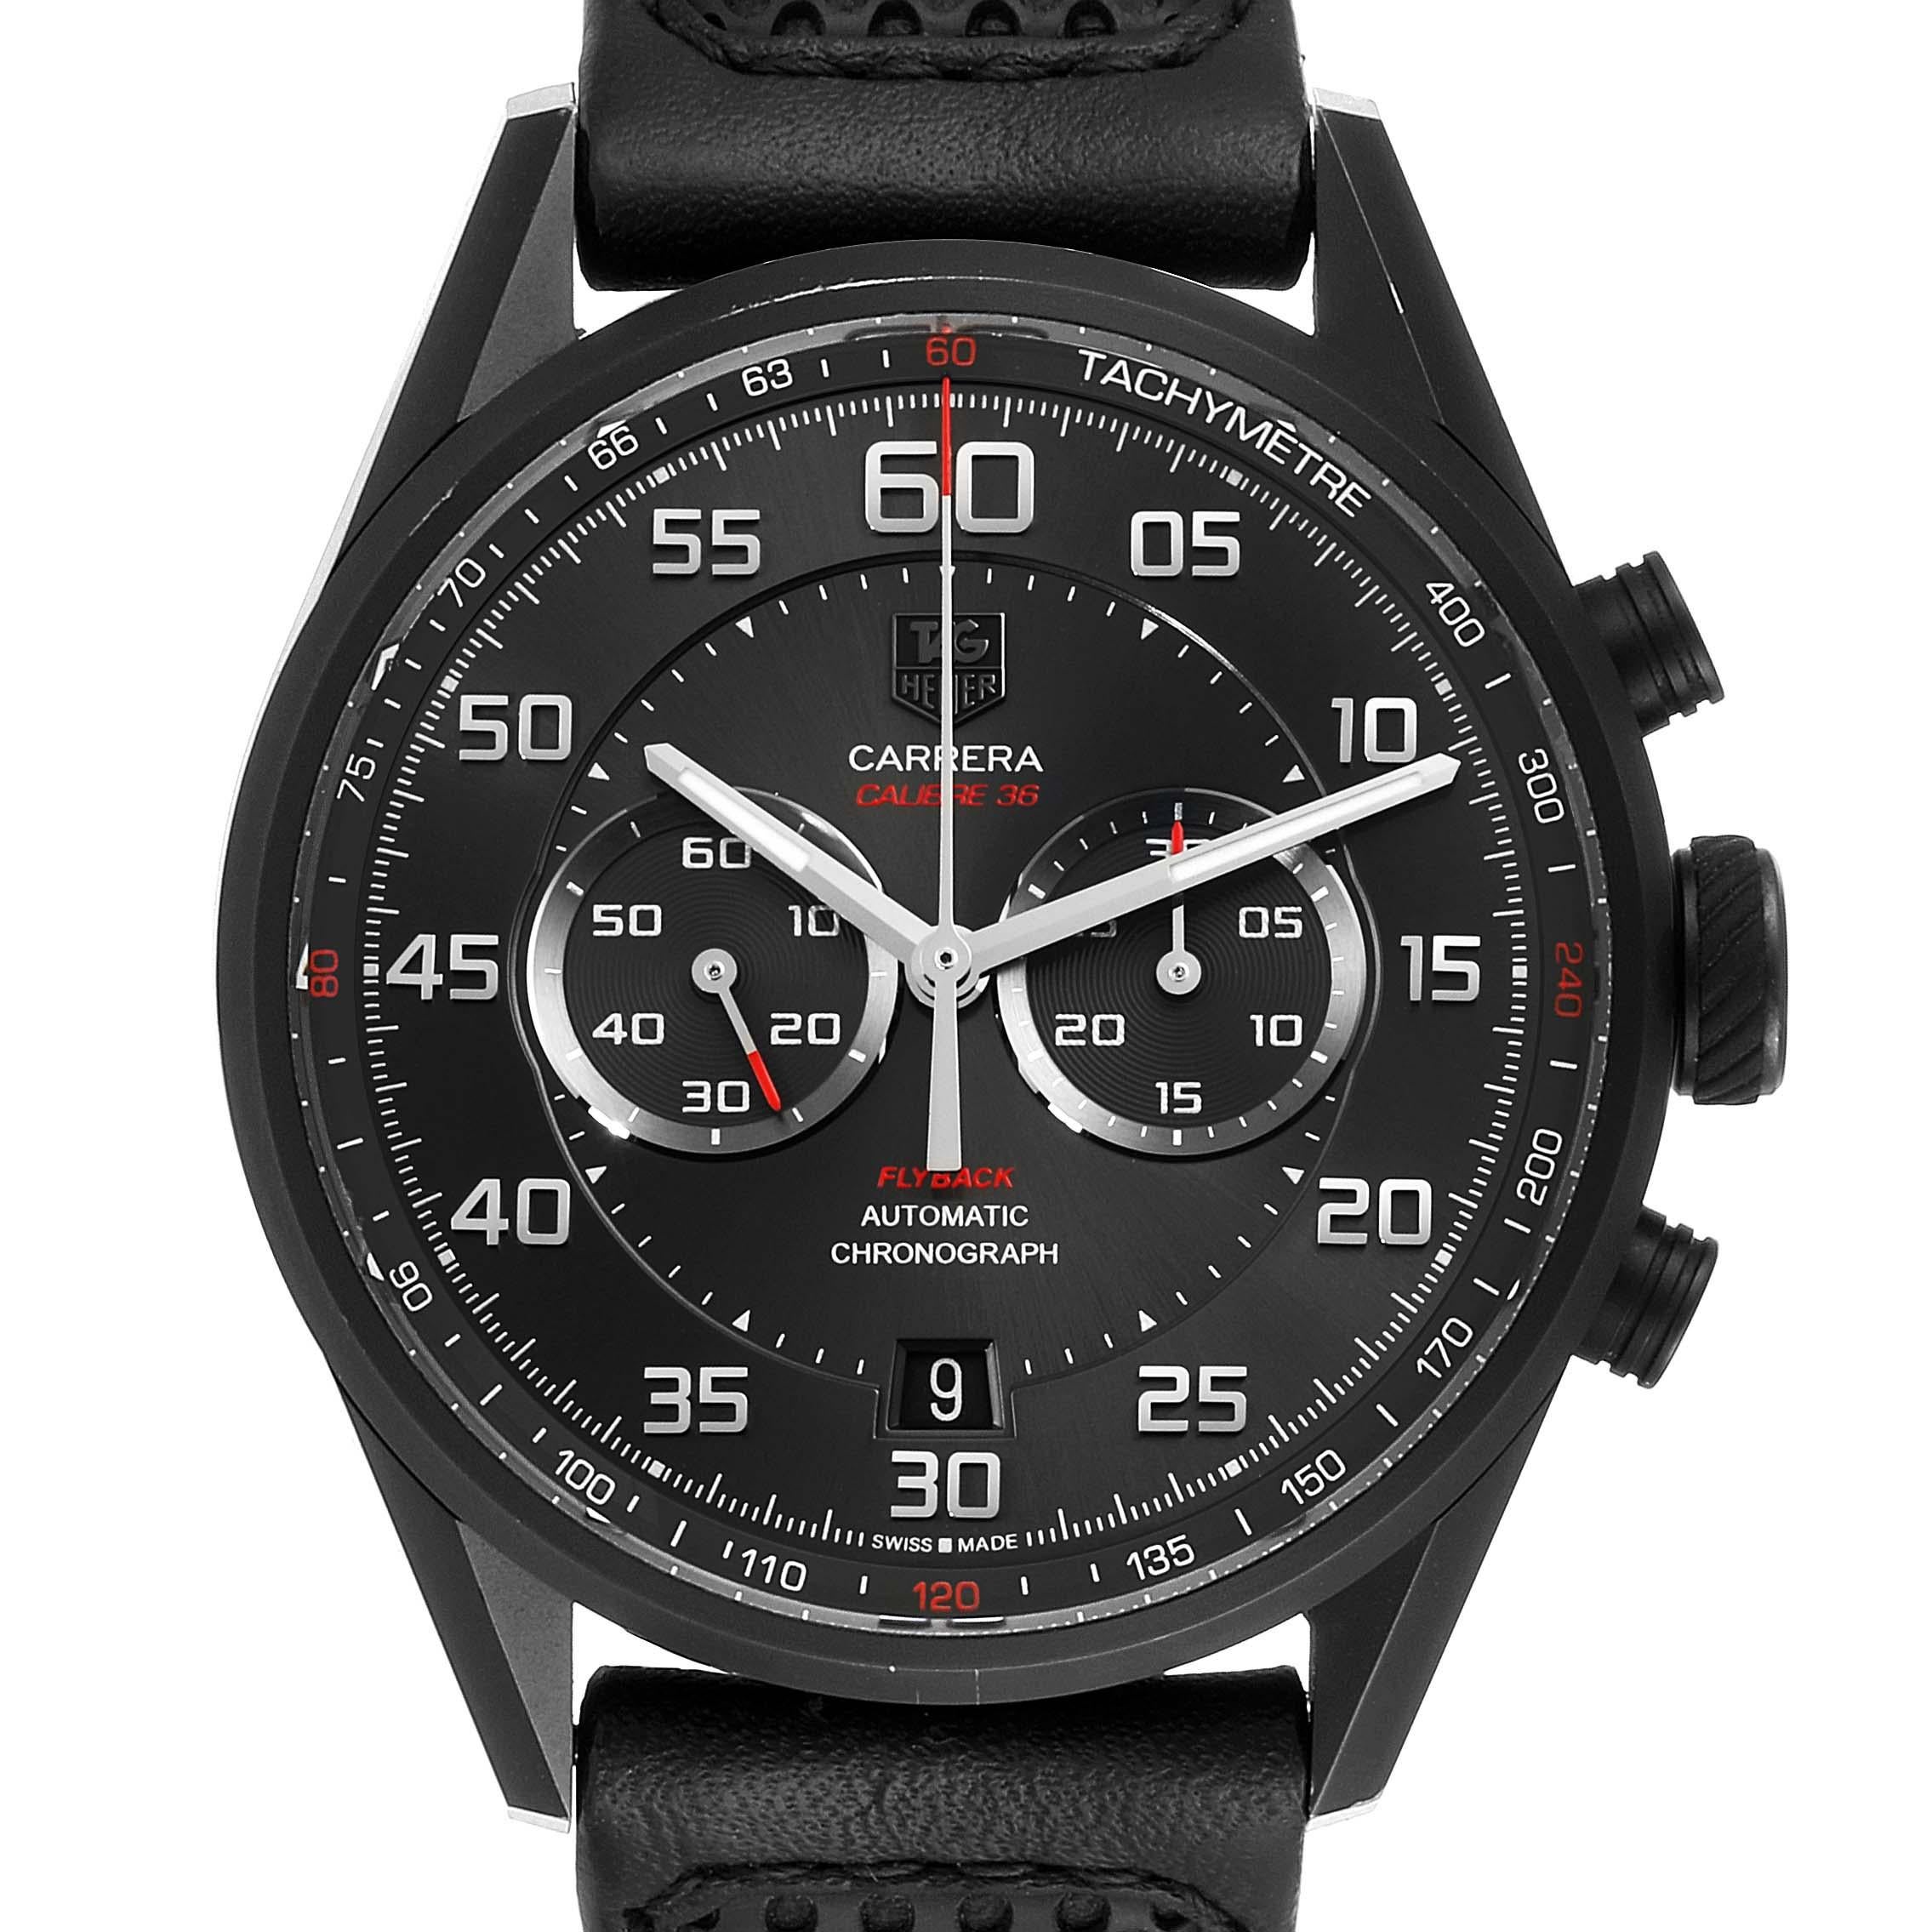 Tag Heuer Carrera Calibre 36 Flyback Titanium Mens Watch CAR2B80. Automatic self-winding movement. Titanium case 43.0 mm. Exhibition sapphire crystal caseback. Black ceramic bezel. Scratch resistant sapphire crystal. Antracite sunray dial with